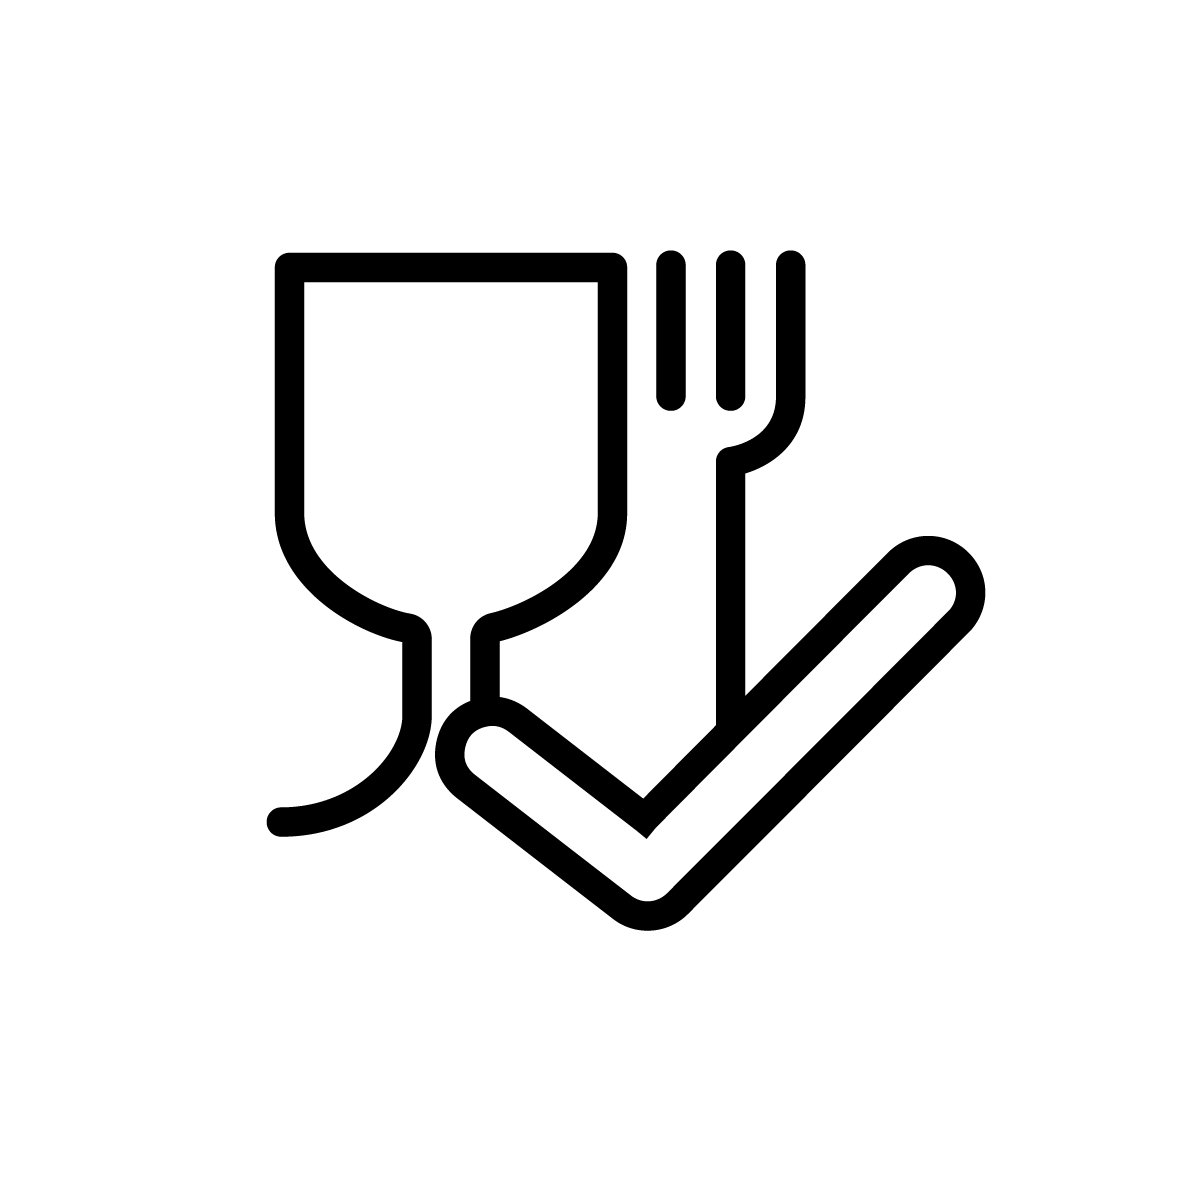 https://solidus.com/wp-content/uploads/2023/02/Solidus_icon_white_USP_food-safe.png